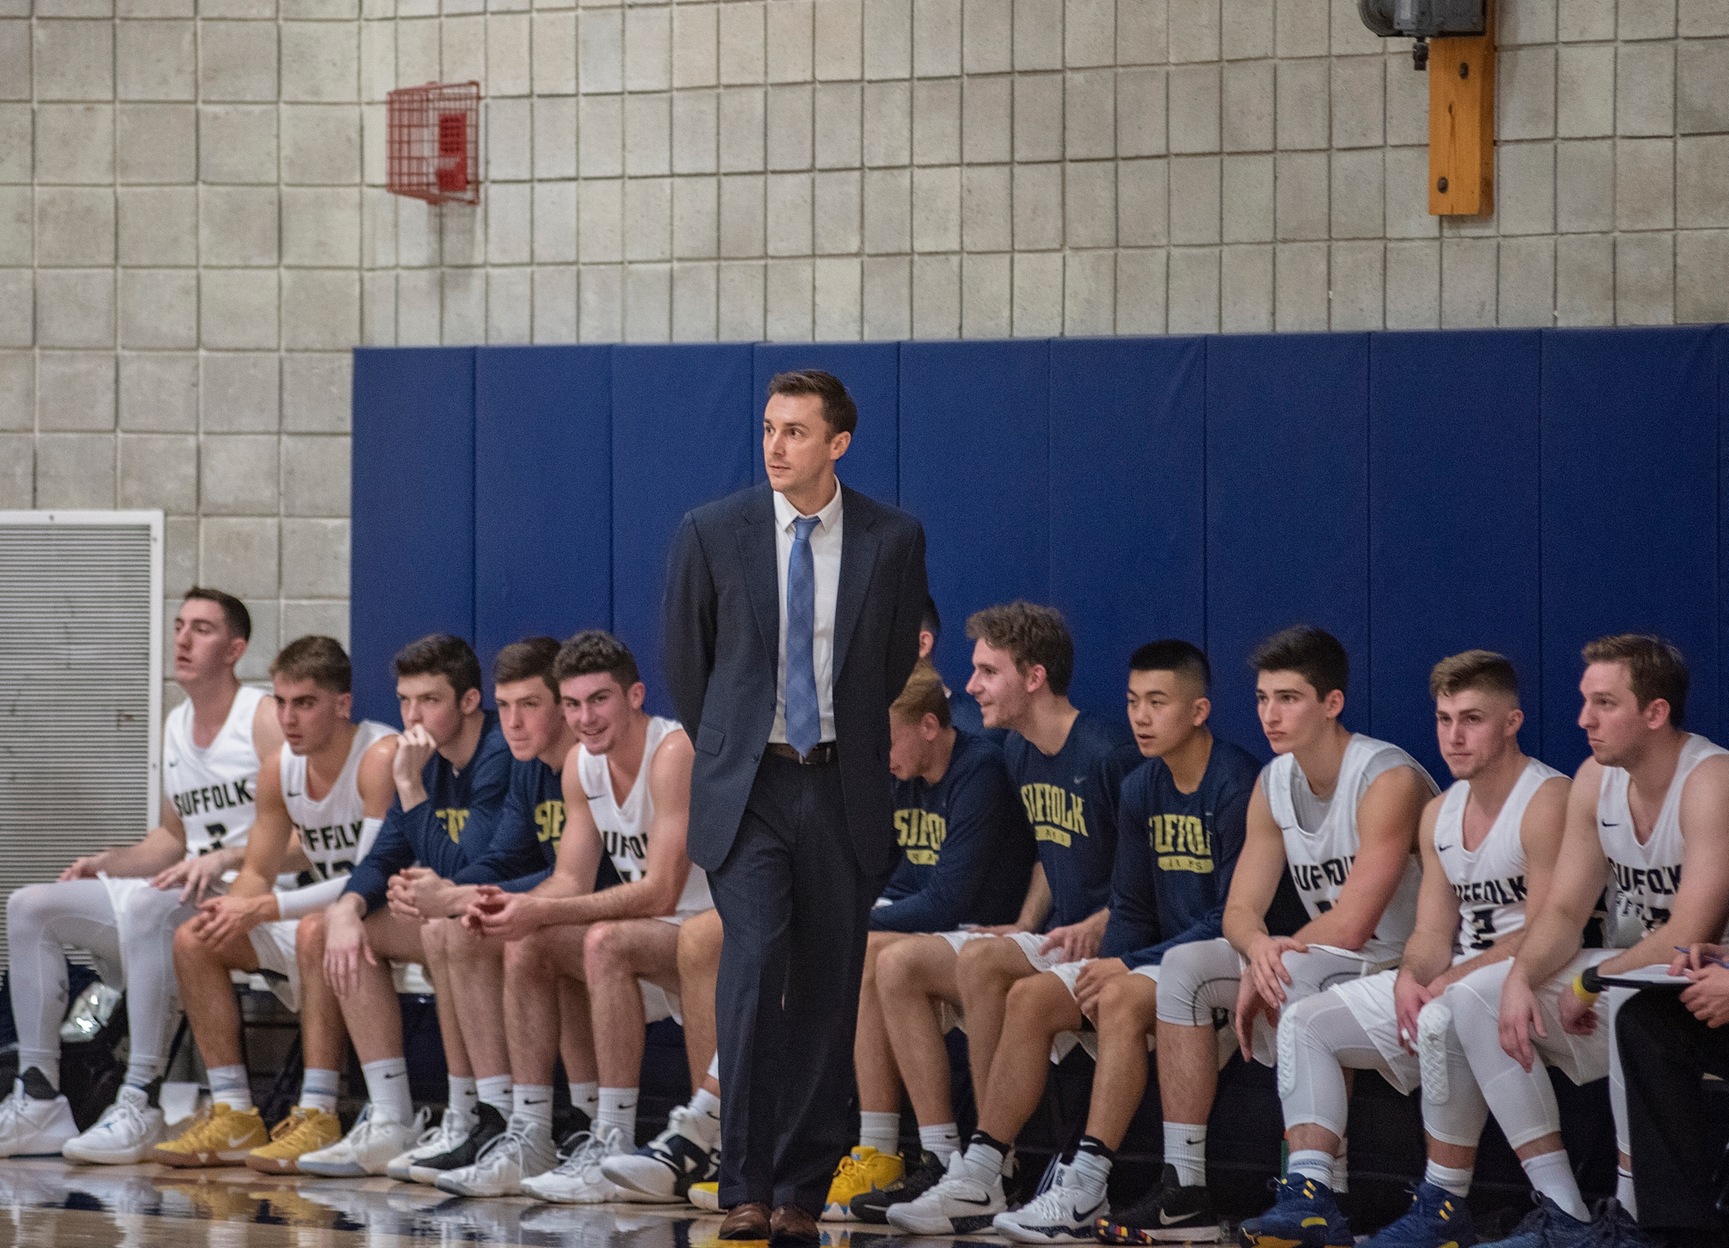 Image of a basketball coach with his players sitting on a bench.